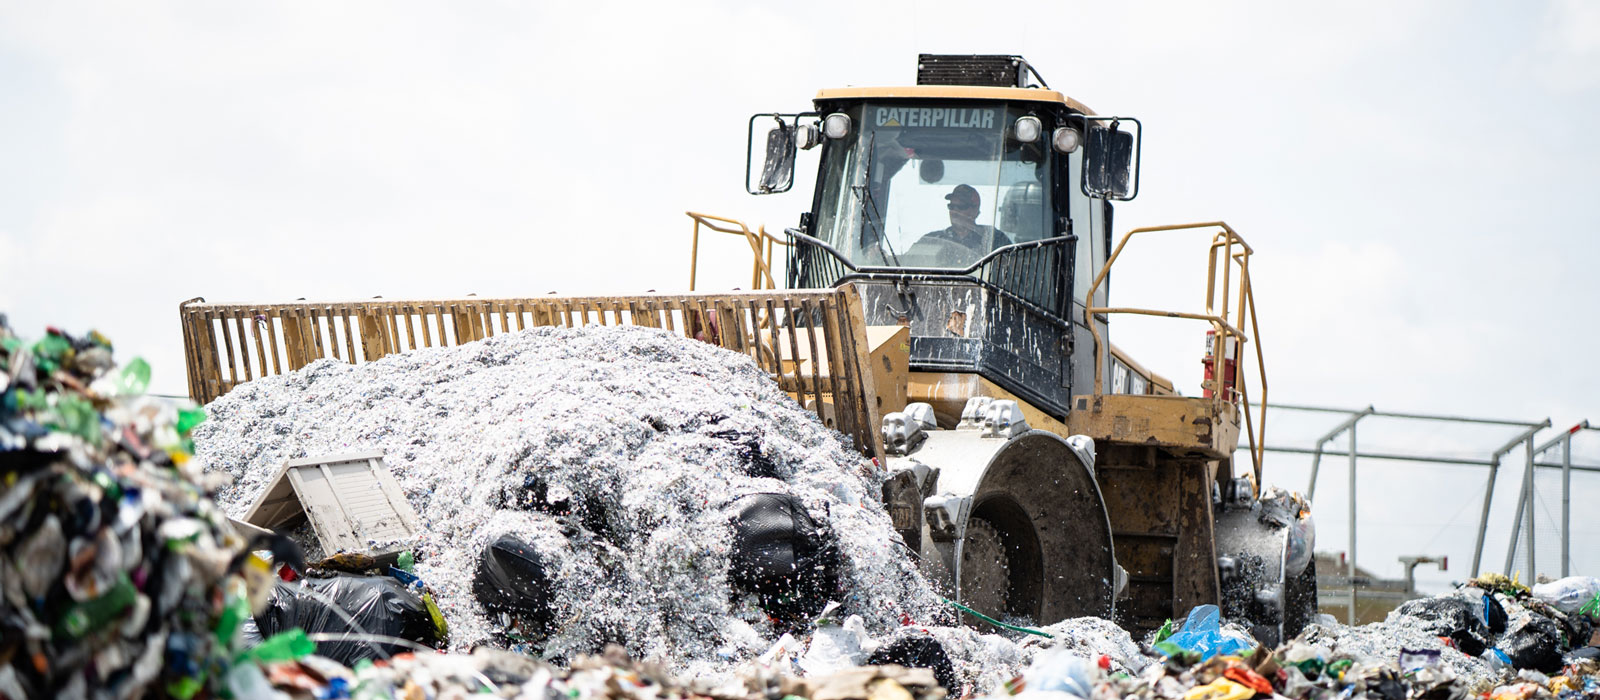 CAT Equipment In Action at Landfills + Waste Site